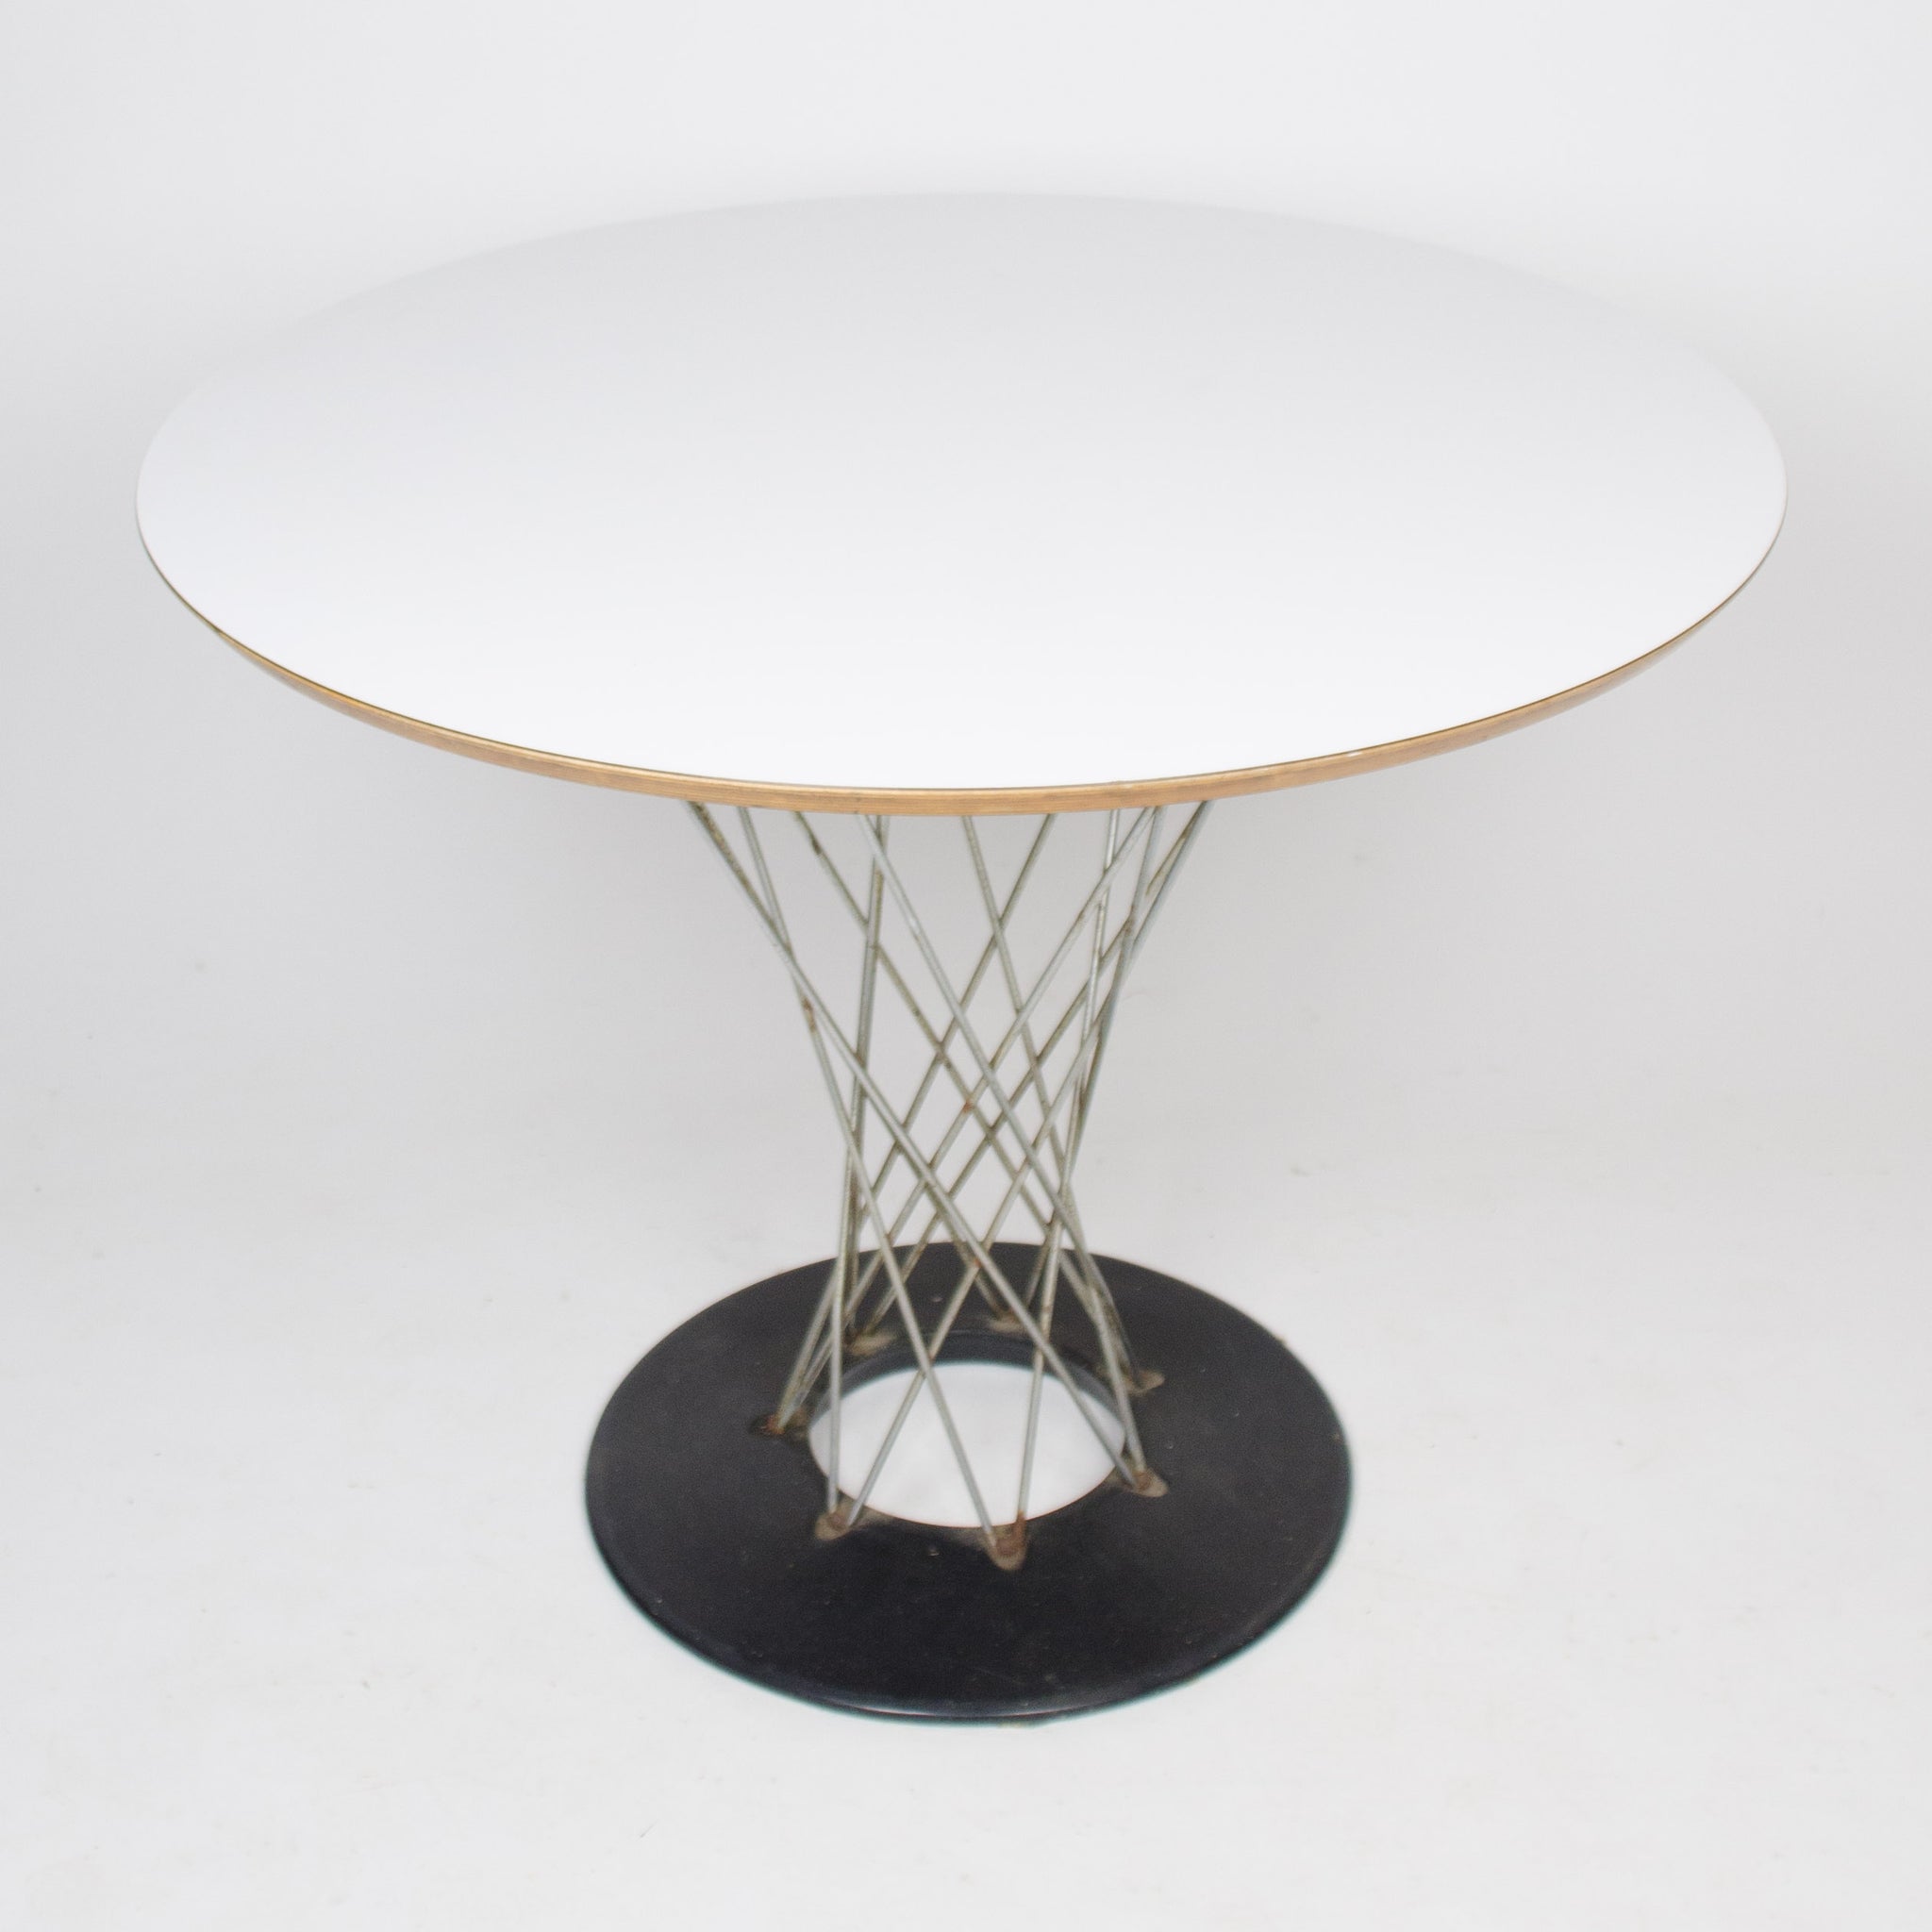 SOLD 1950's Rare Isamu Noguchi For Knoll Associates Original Cyclone Wire Dining Table